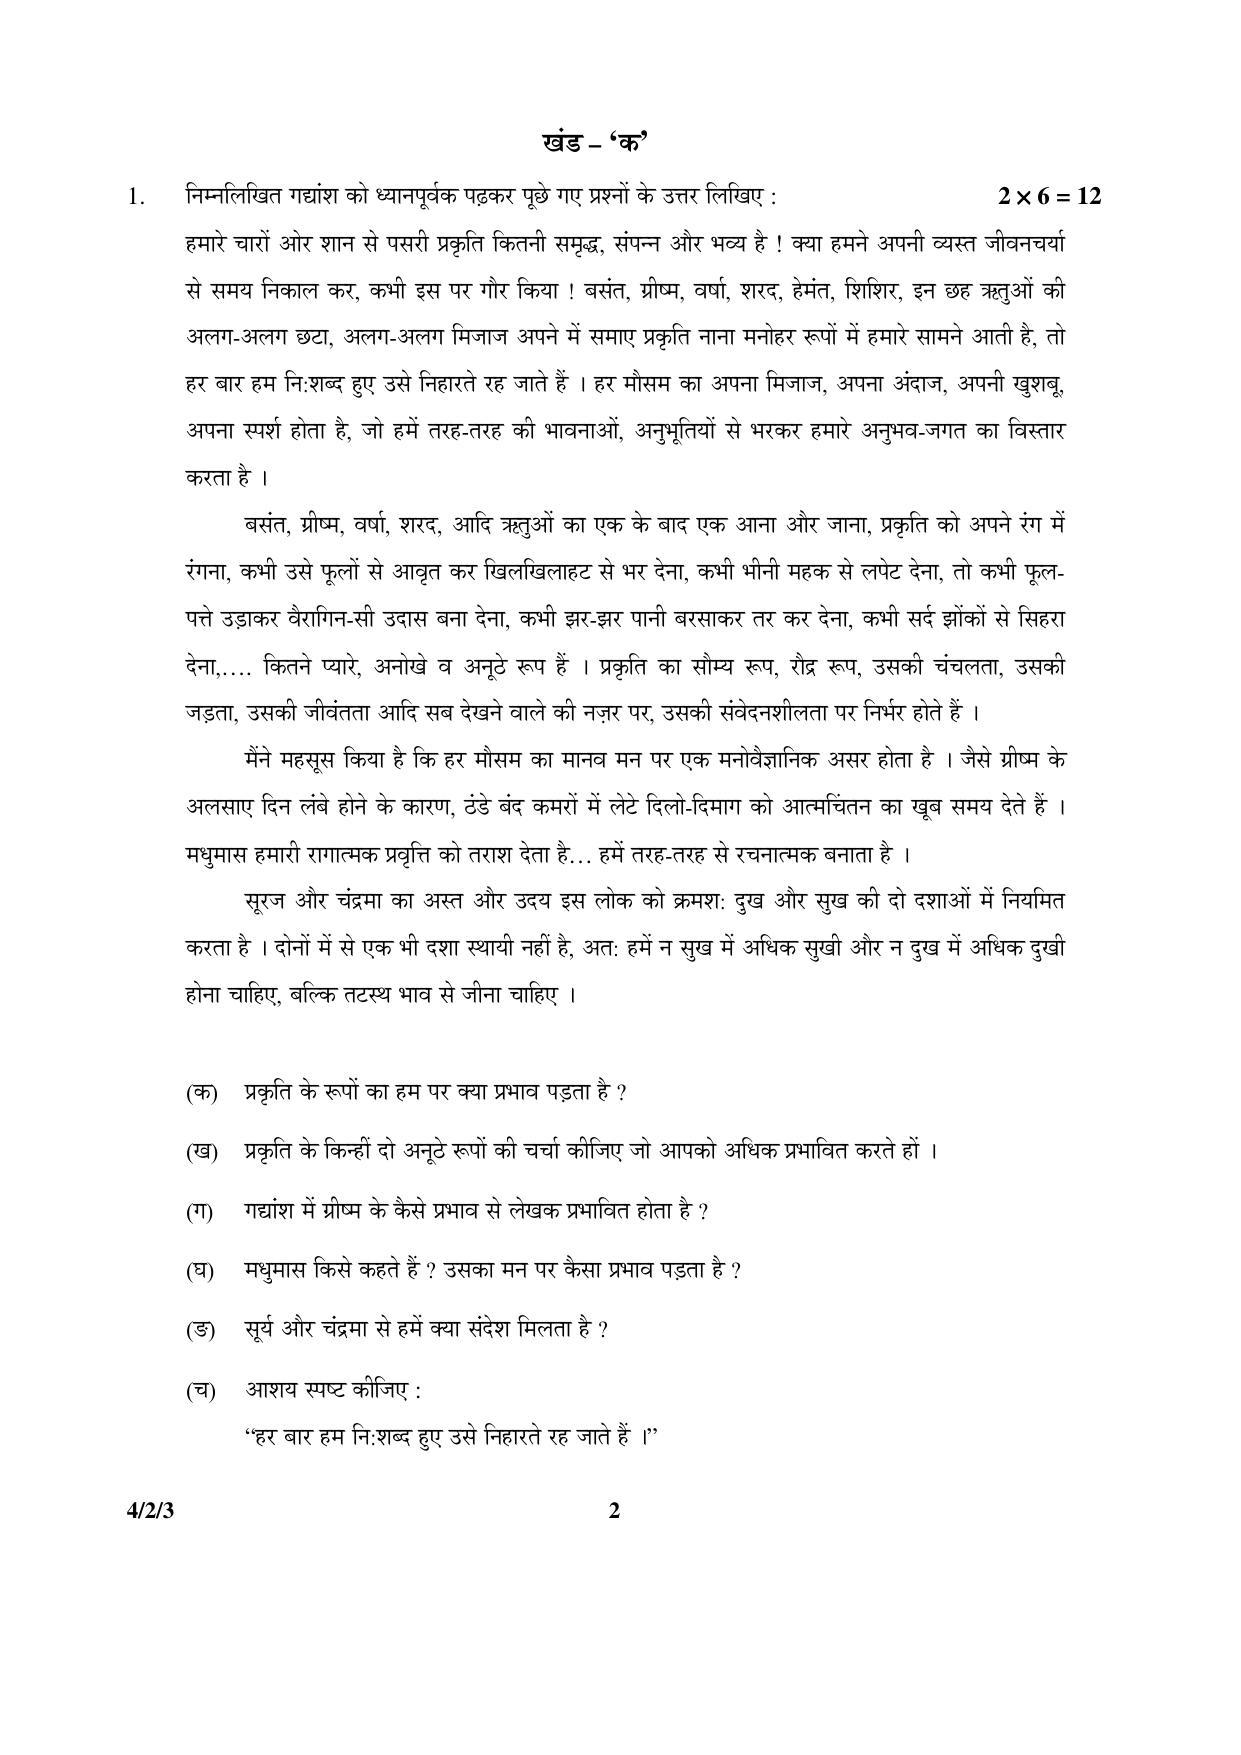 CBSE Class 10 4-2-3  Hindi - B 2016 Question Paper - Page 2